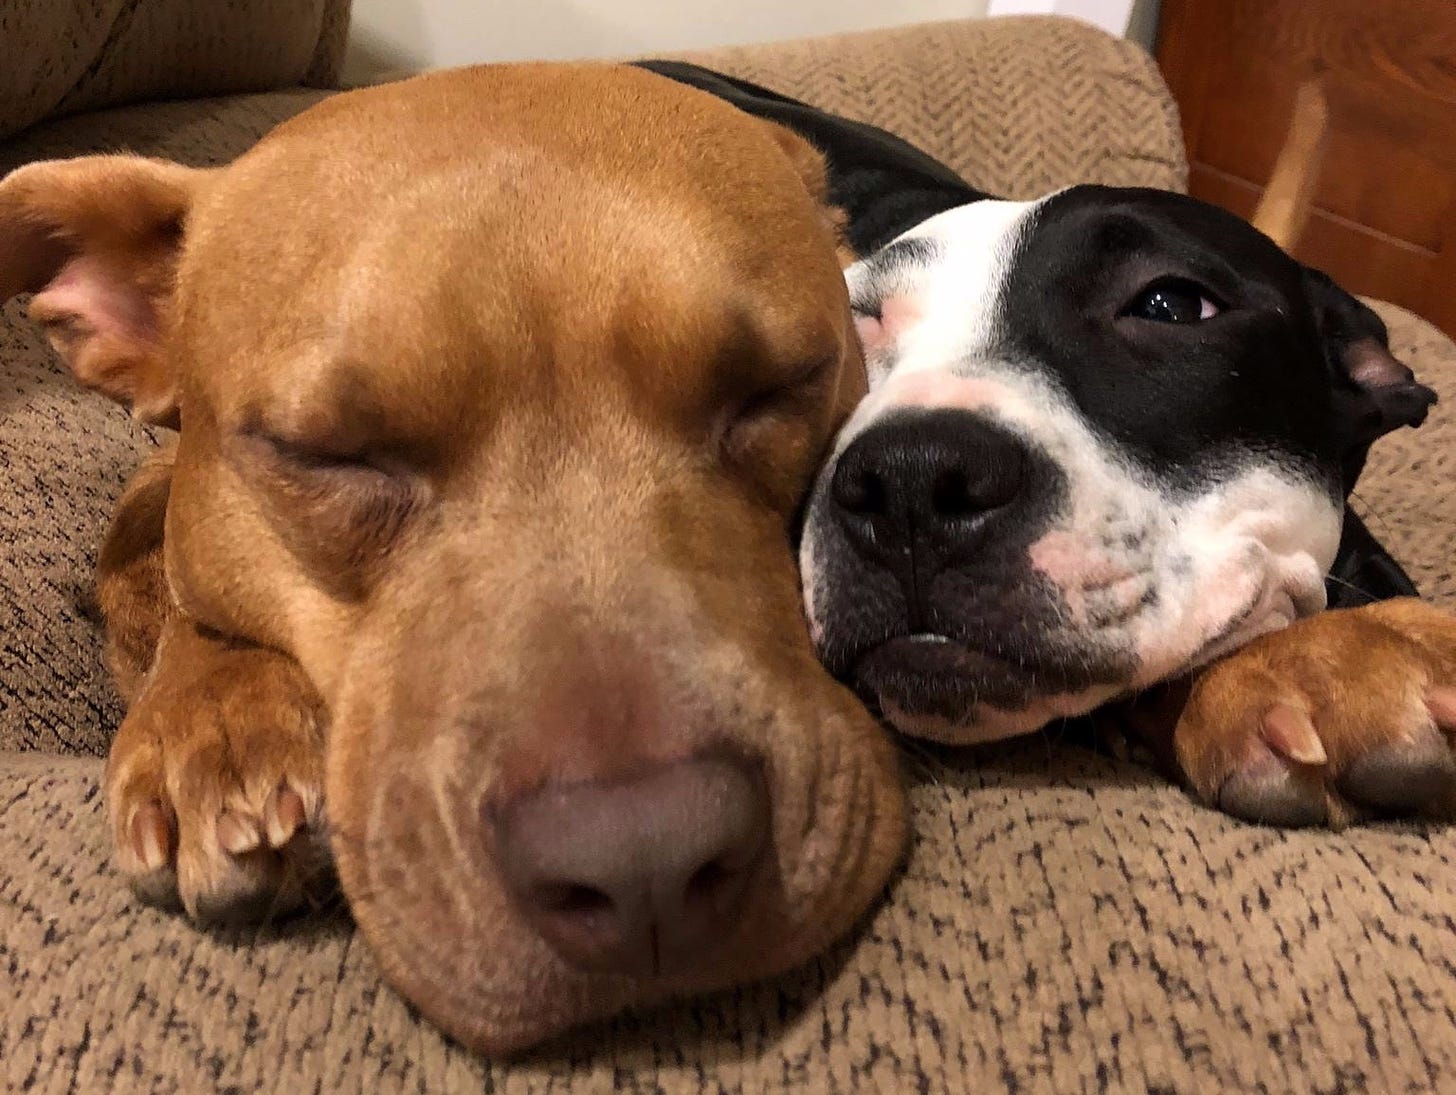 a photo of my brown pitfall Dorothy sleeping with her eye closed and her black and white little sister Dru snuggled up next to her face